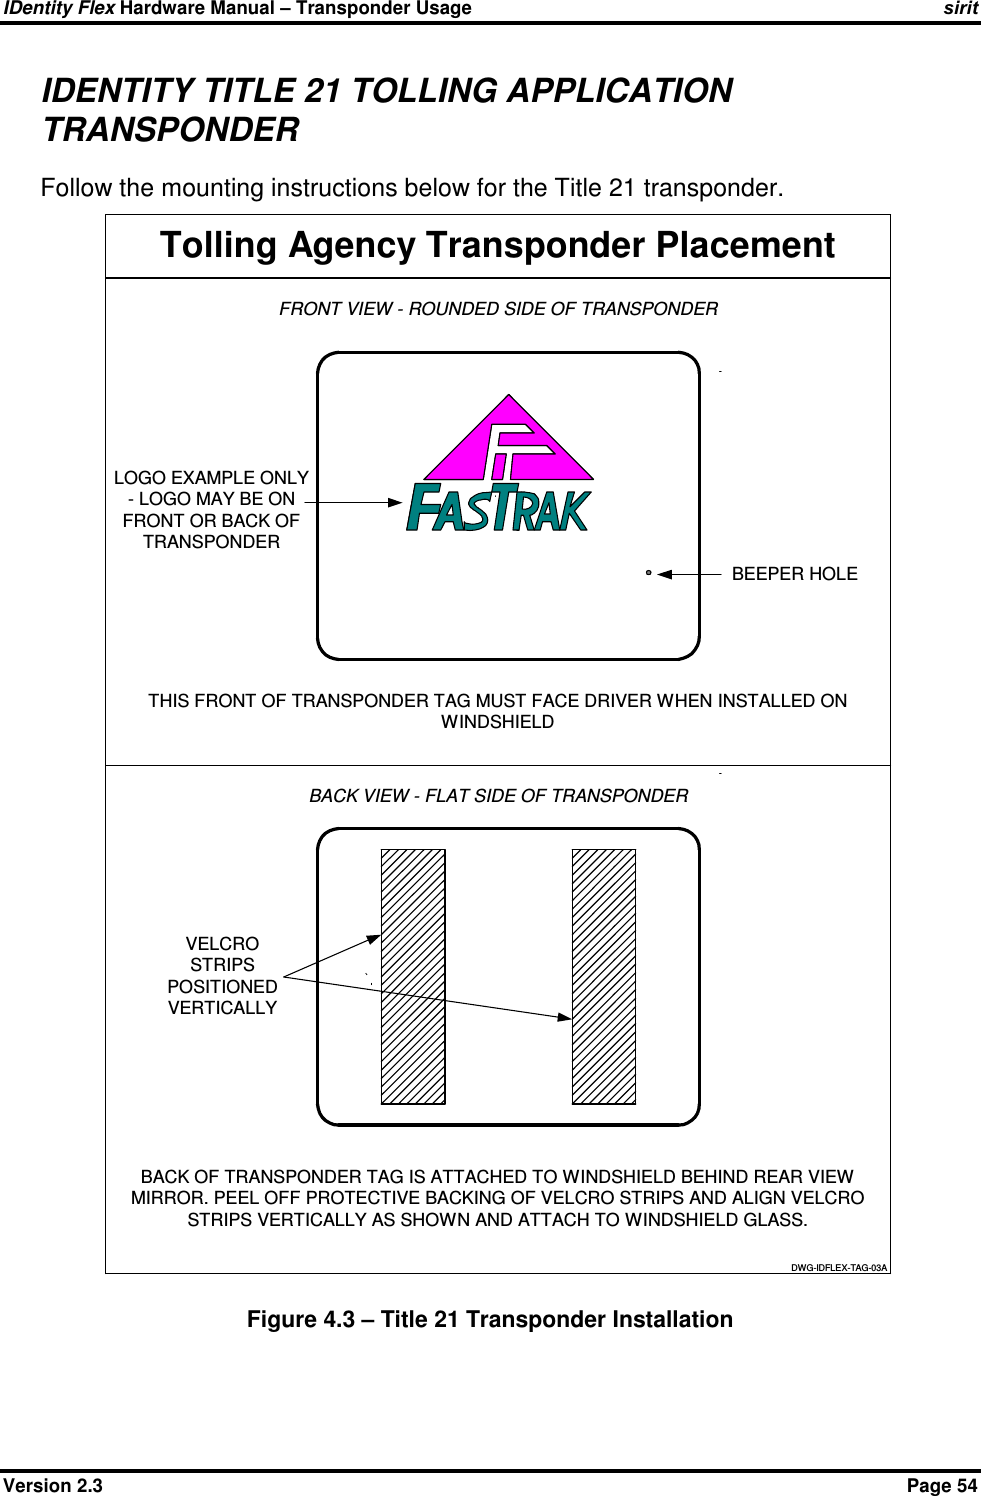 IDentity Flex Hardware Manual – Transponder Usage   sirit Version 2.3    Page 54 IDENTITY TITLE 21 TOLLING APPLICATION TRANSPONDER Follow the mounting instructions below for the Title 21 transponder.  Figure 4.3 – Title 21 Transponder Installation  Tolling Agency Transponder PlacementTHIS FRONT OF TRANSPONDER TAG MUST FACE DRIVER WHEN INSTALLED ONWINDSHIELDBACK OF TRANSPONDER TAG IS ATTACHED TO WINDSHIELD BEHIND REAR VIEWMIRROR. PEEL OFF PROTECTIVE BACKING OF VELCRO STRIPS AND ALIGN VELCROSTRIPS VERTICALLY AS SHOWN AND ATTACH TO WINDSHIELD GLASS.VELCROSTRIPSPOSITIONEDVERTICALLYBACK VIEW - FLAT SIDE OF TRANSPONDERBEEPER HOLEFRONT VIEW - ROUNDED SIDE OF TRANSPONDERLOGO EXAMPLE ONLY- LOGO MAY BE ONFRONT OR BACK OFTRANSPONDERDWG-IDFLEX-TAG-03A